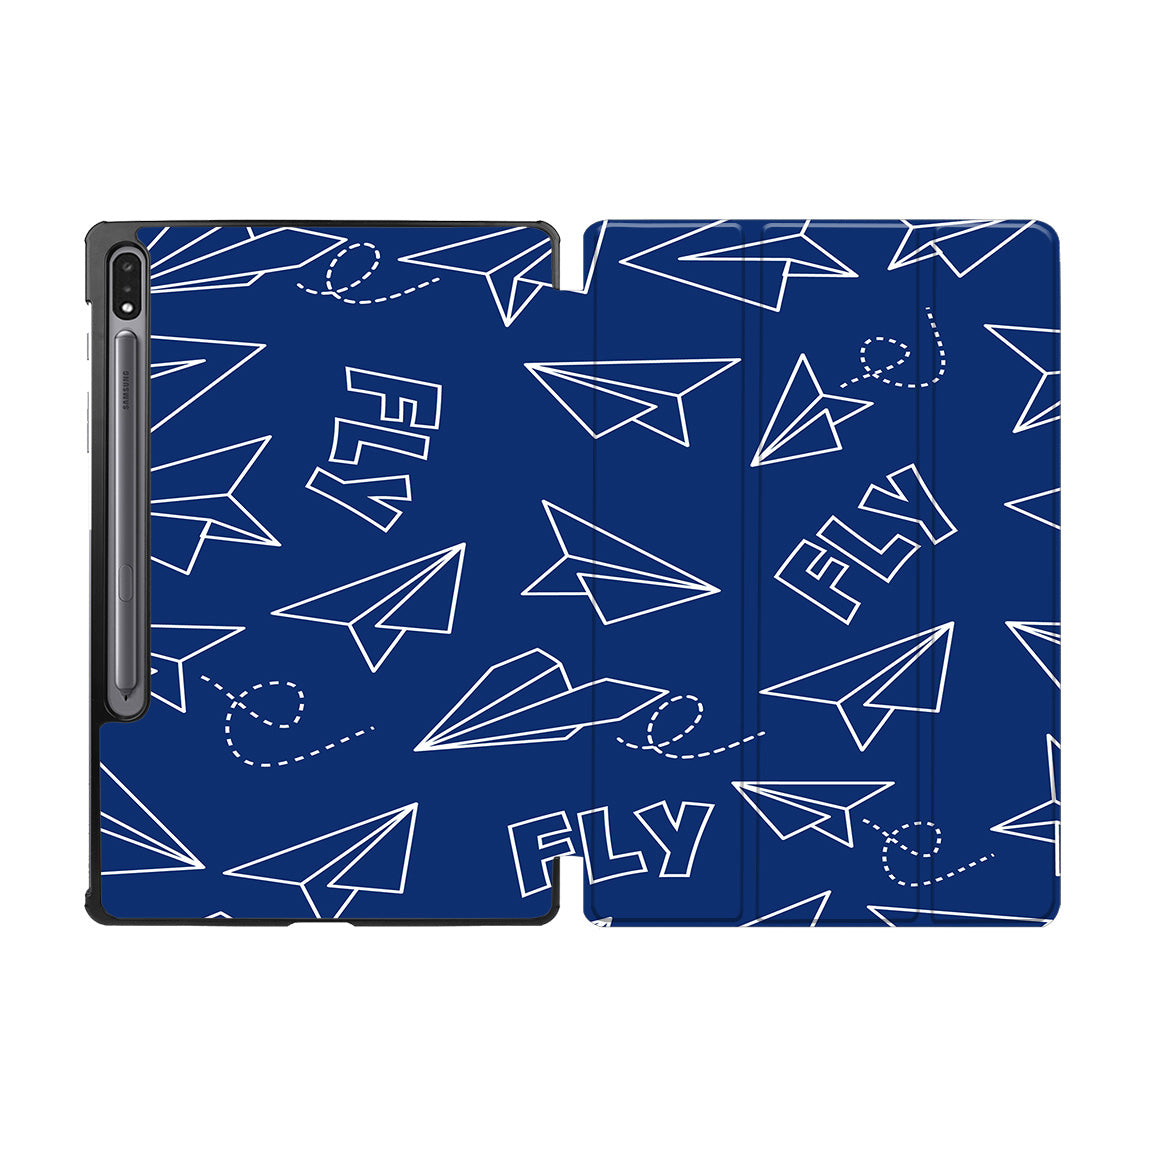 Paper Airplane & Fly (Blue) Designed Samsung Tablet Cases